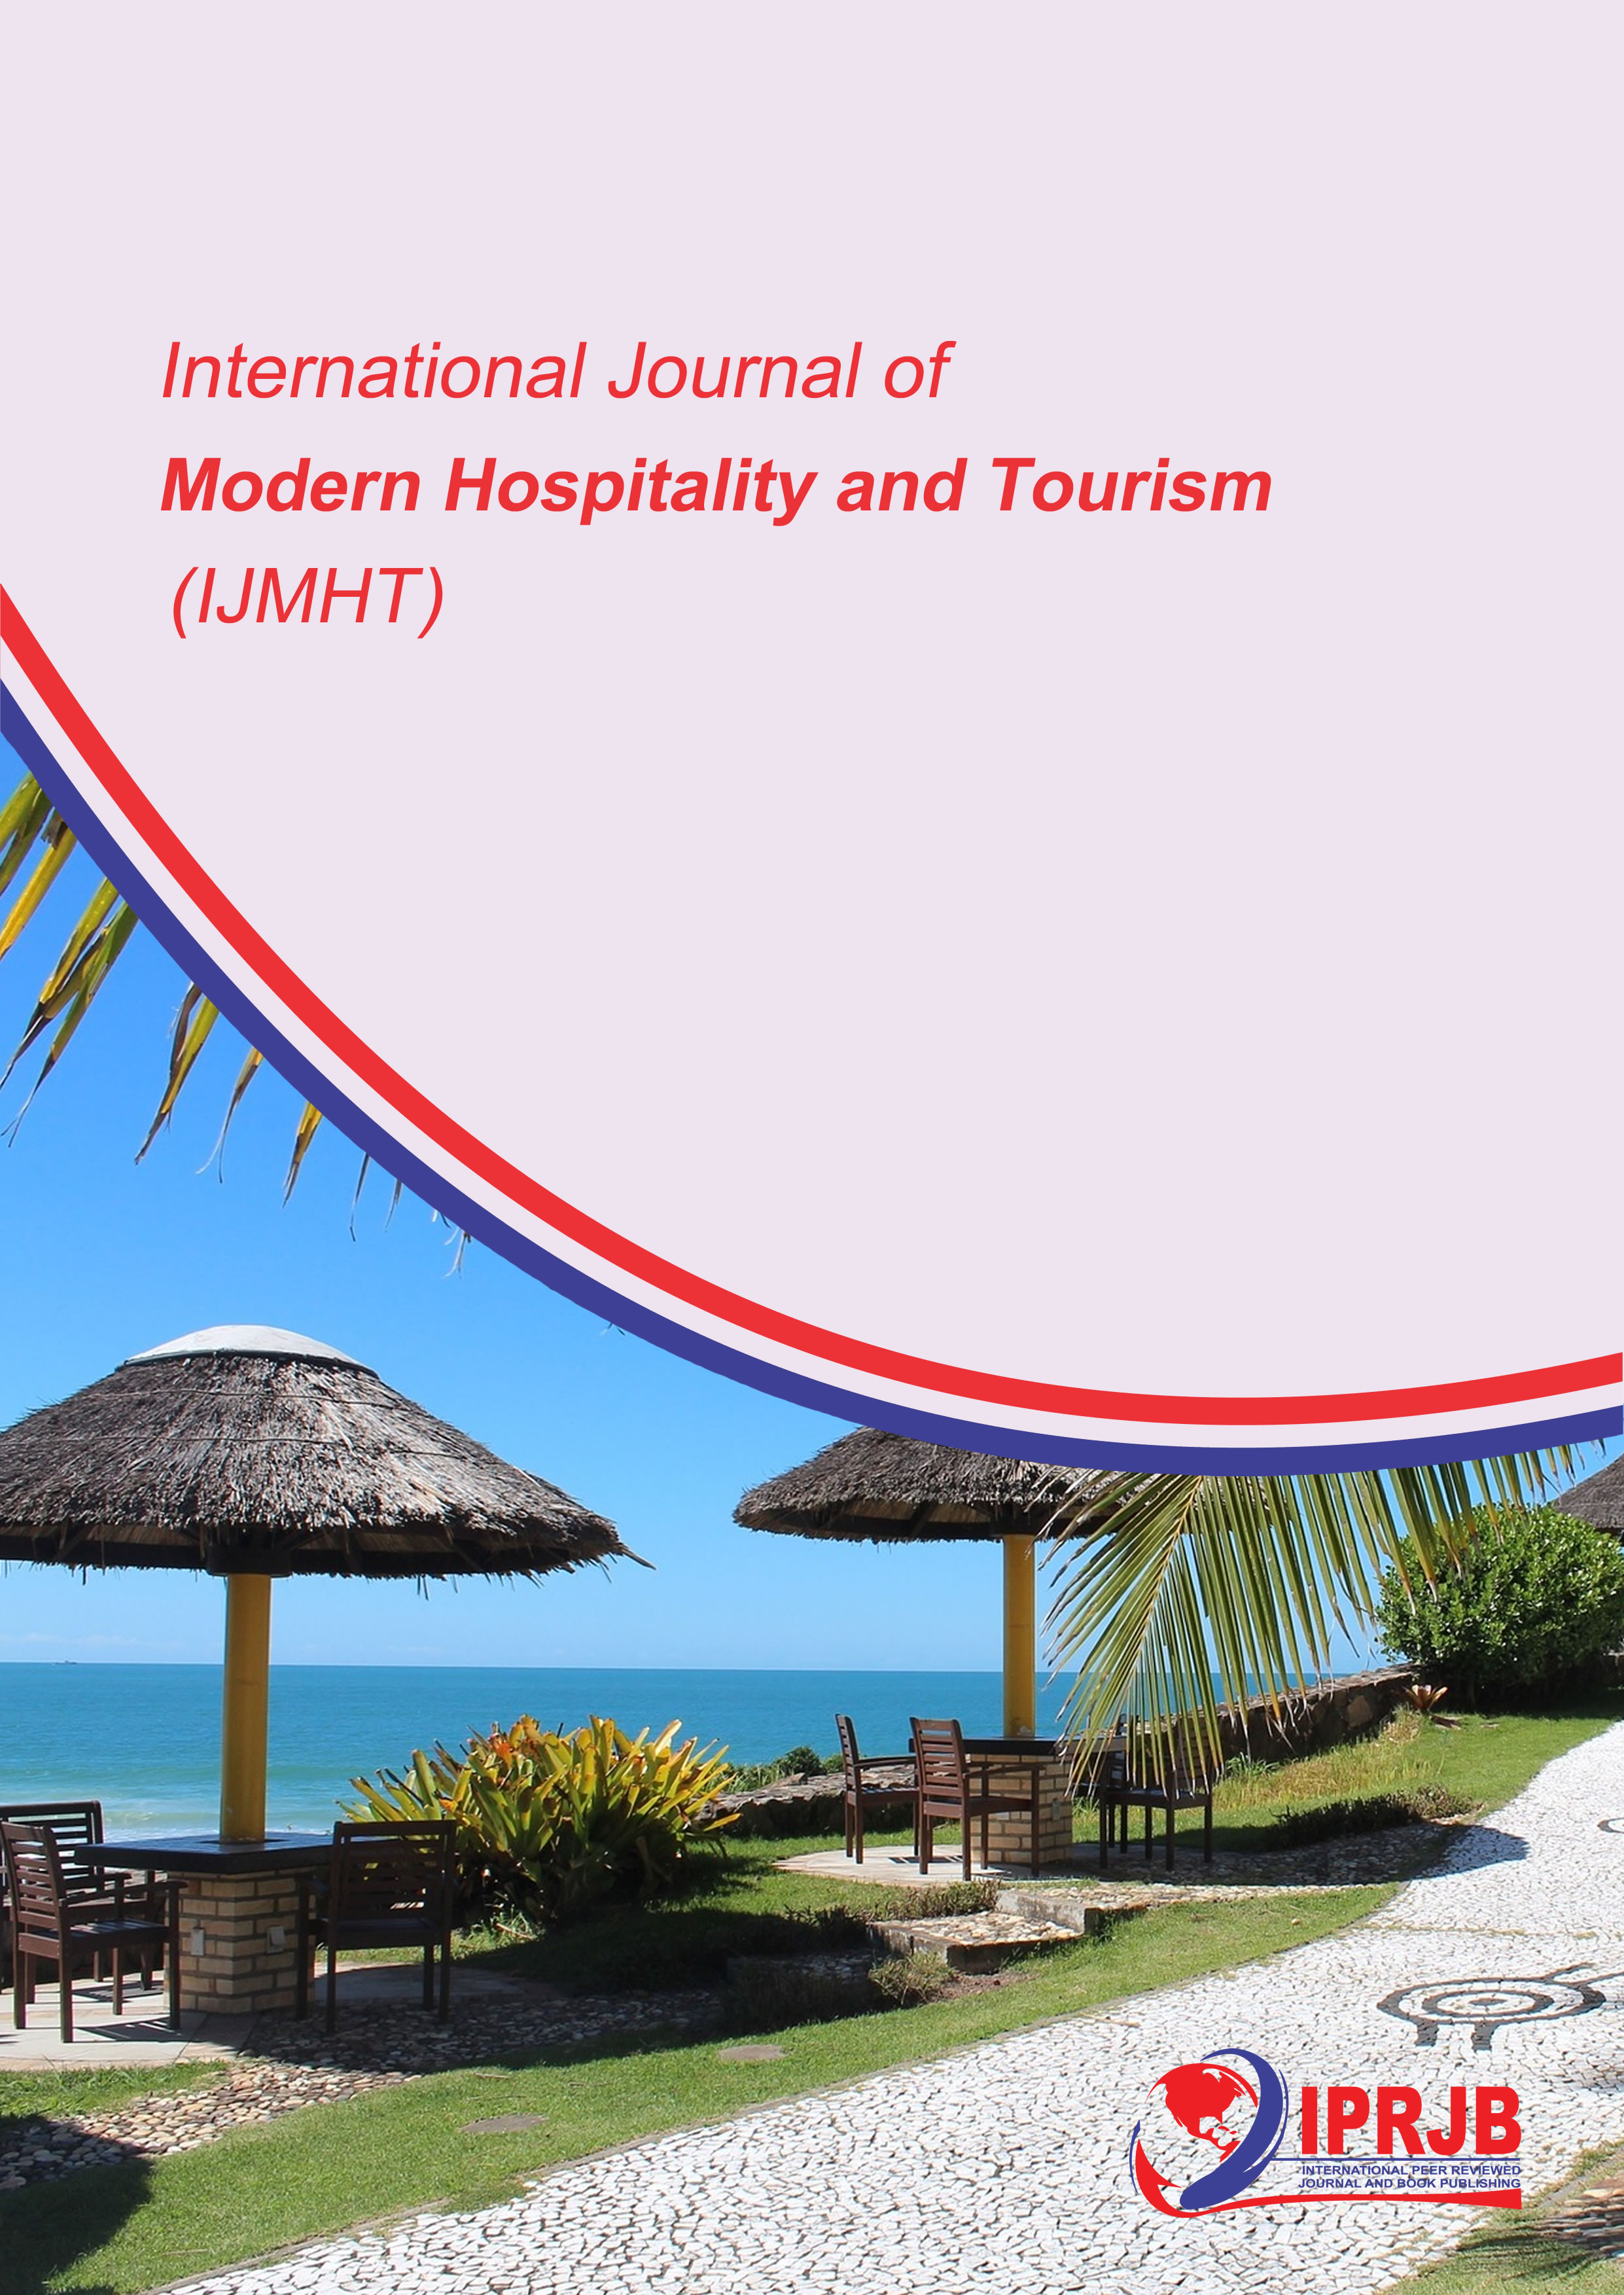 journal of quality assurance in hospitality & tourism impact factor